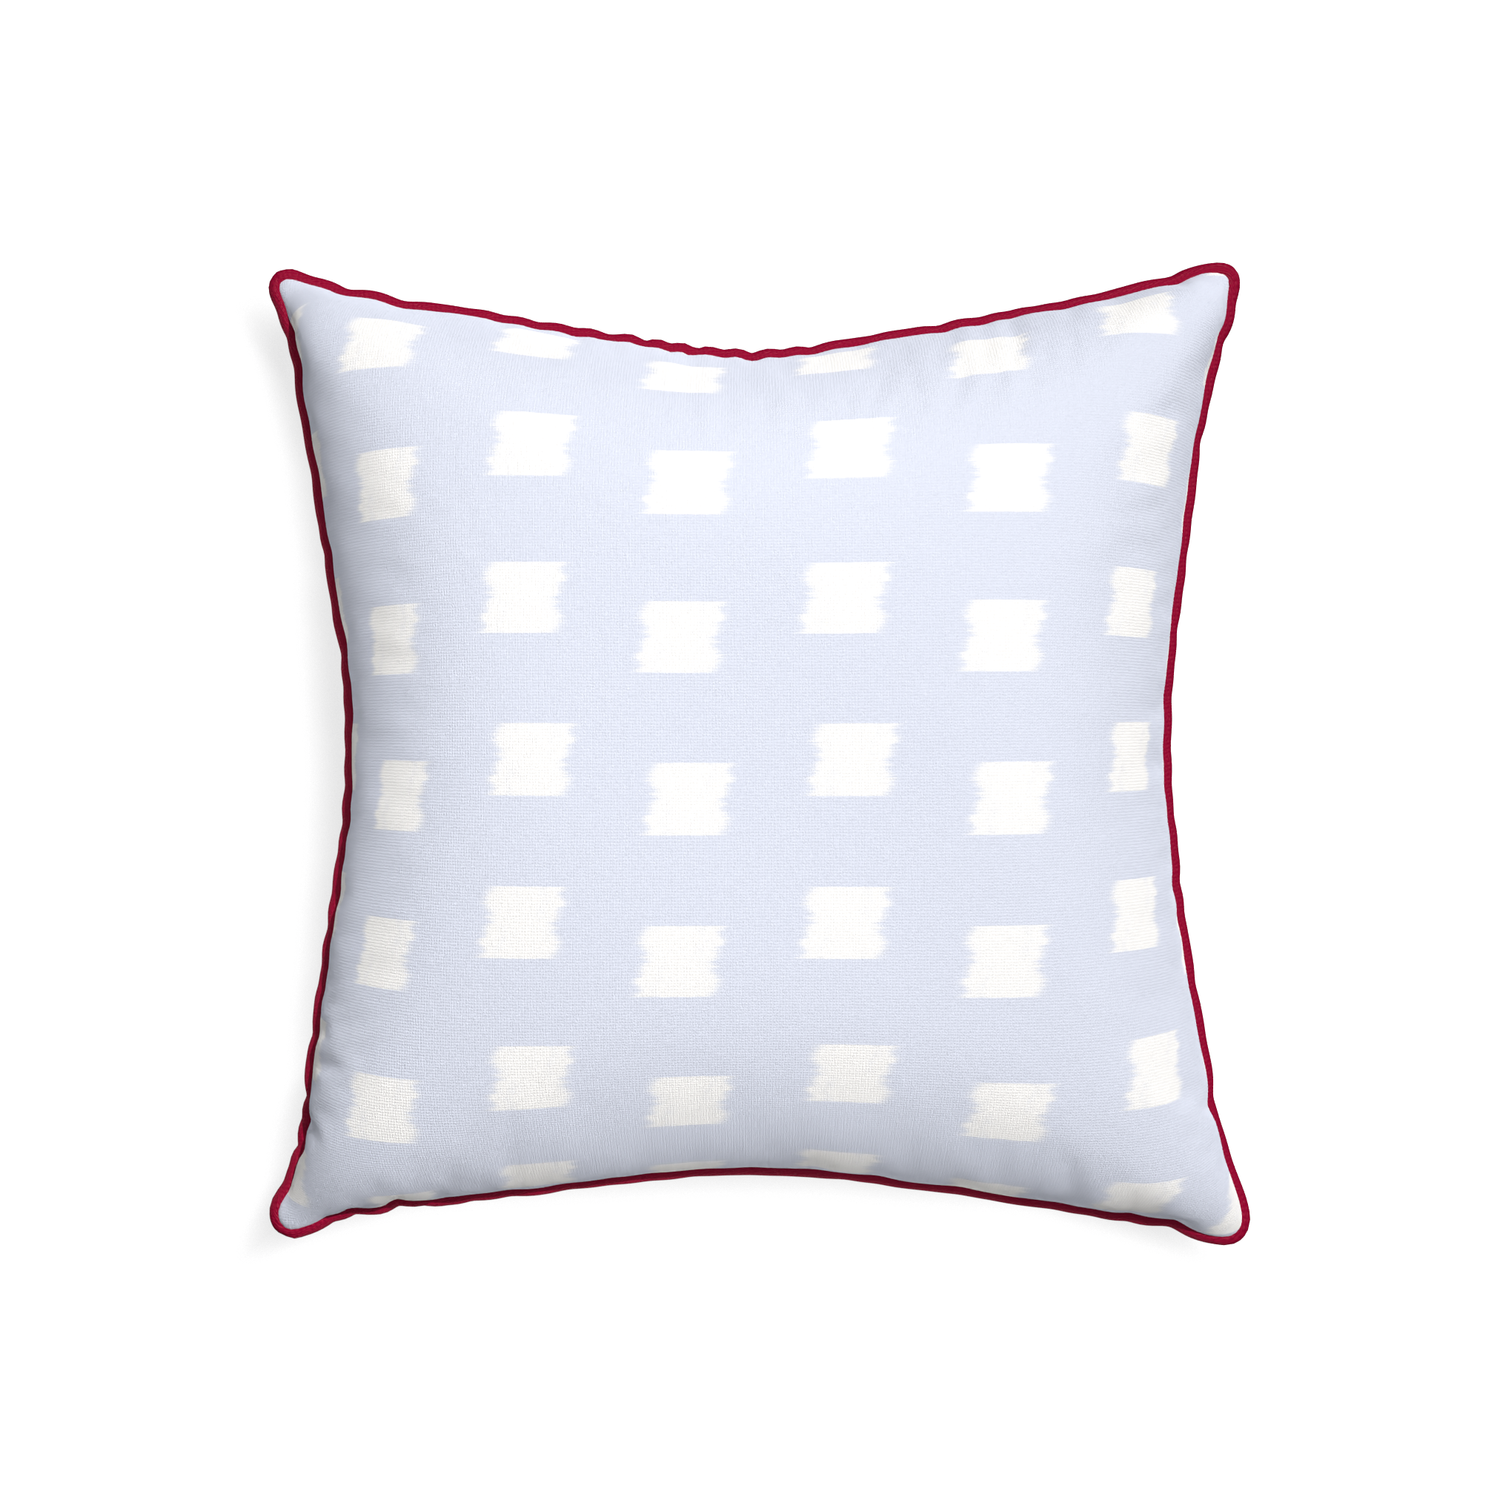 22-square denton custom pillow with raspberry piping on white background